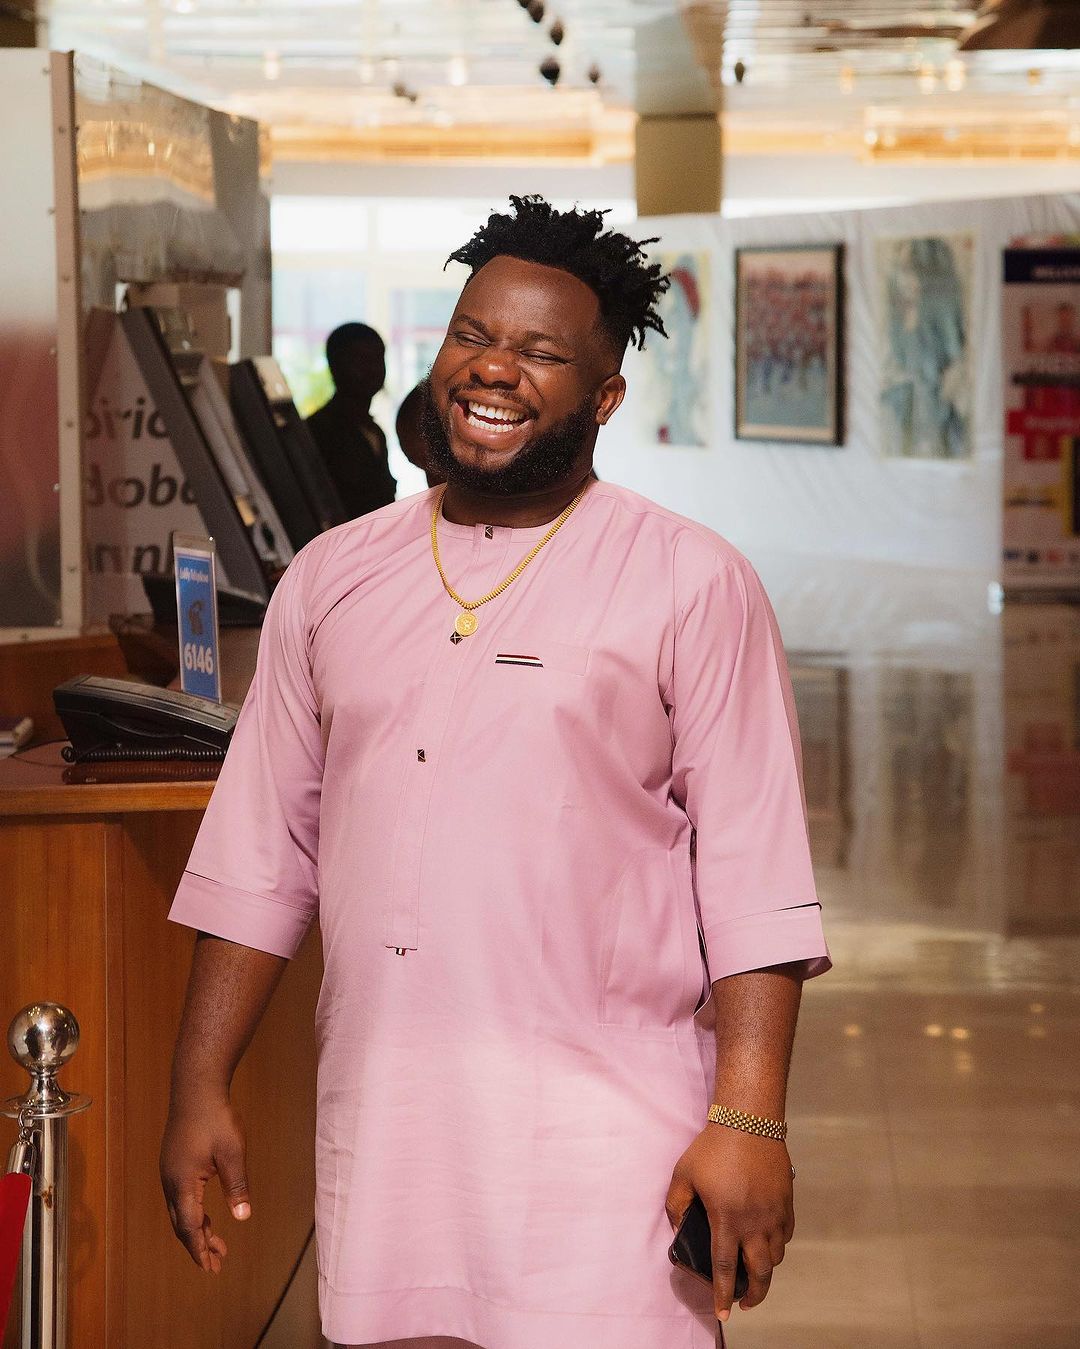 "Why I go comot my gbola come online dey shout make Nigerians help me" - Sabinus says in reaction to Jay Boogie's surgery 